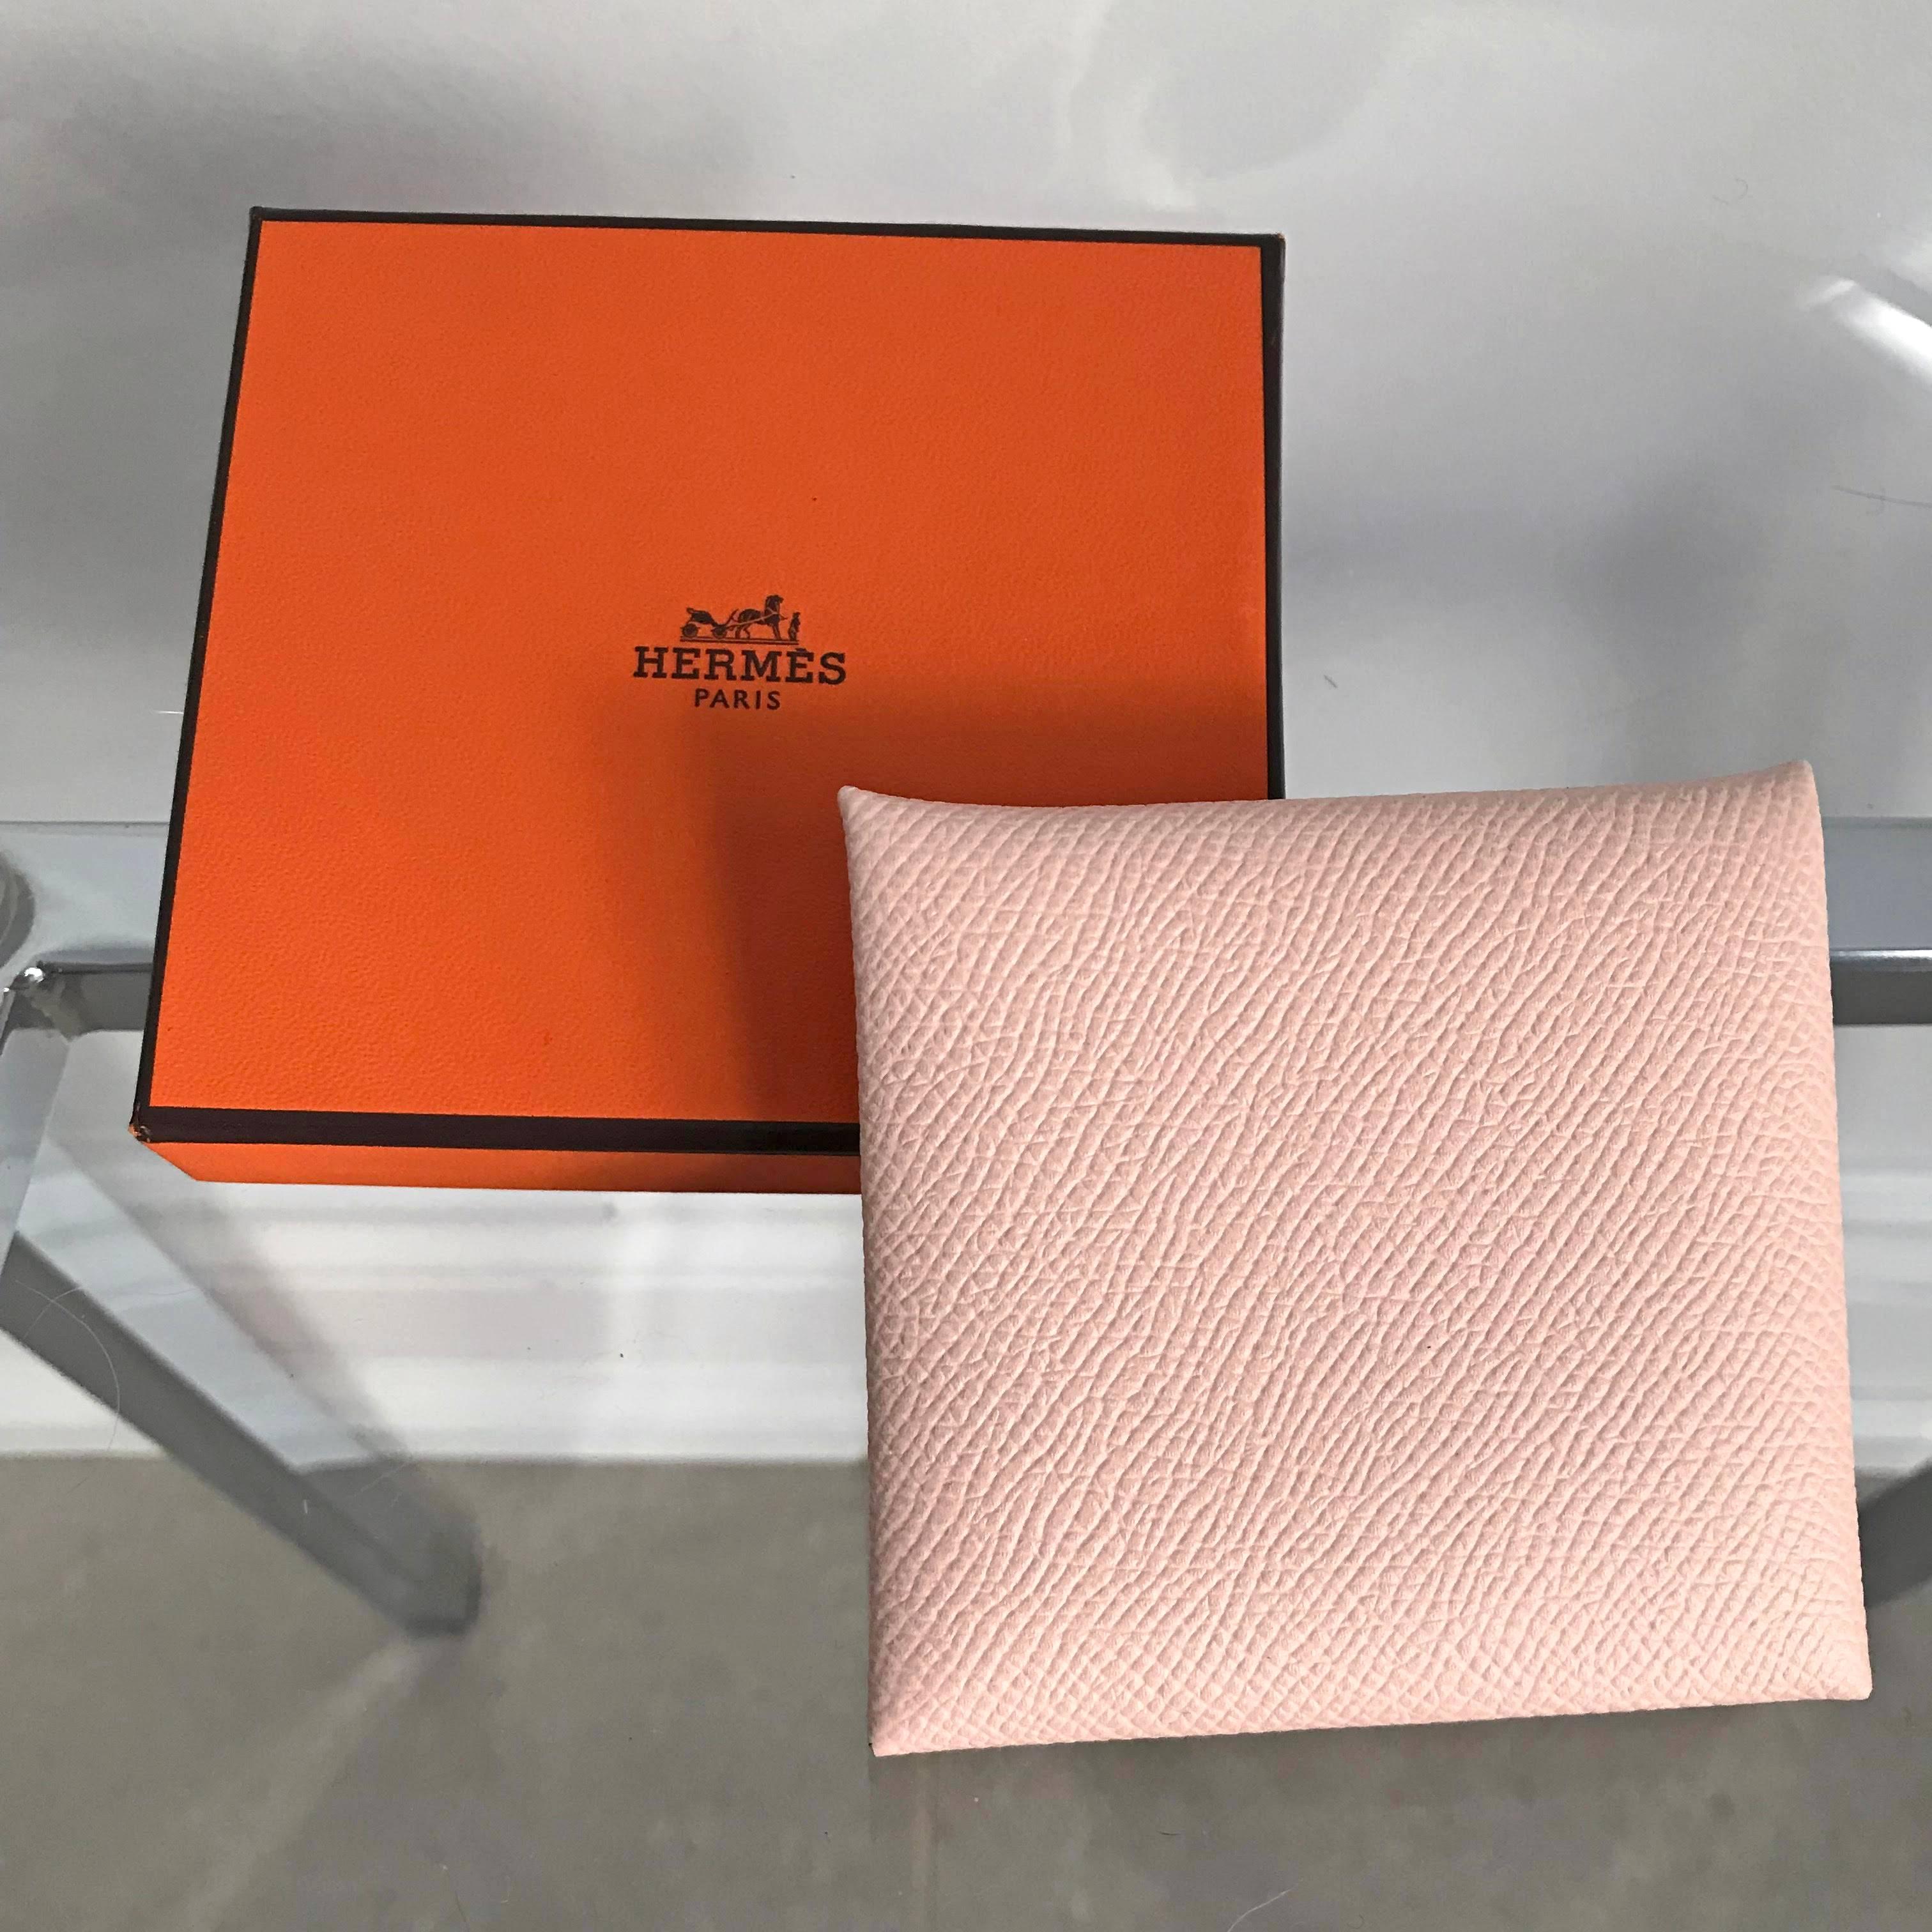 Hermes Bastia coin holder purse.  Square shaped fold over coin pouch that fastens with snap closure.  Epsom leather in light blush pink Rose Eglantine color.  Date stamp X for production year 2016.  Includes box.  Excellent condition - used once if